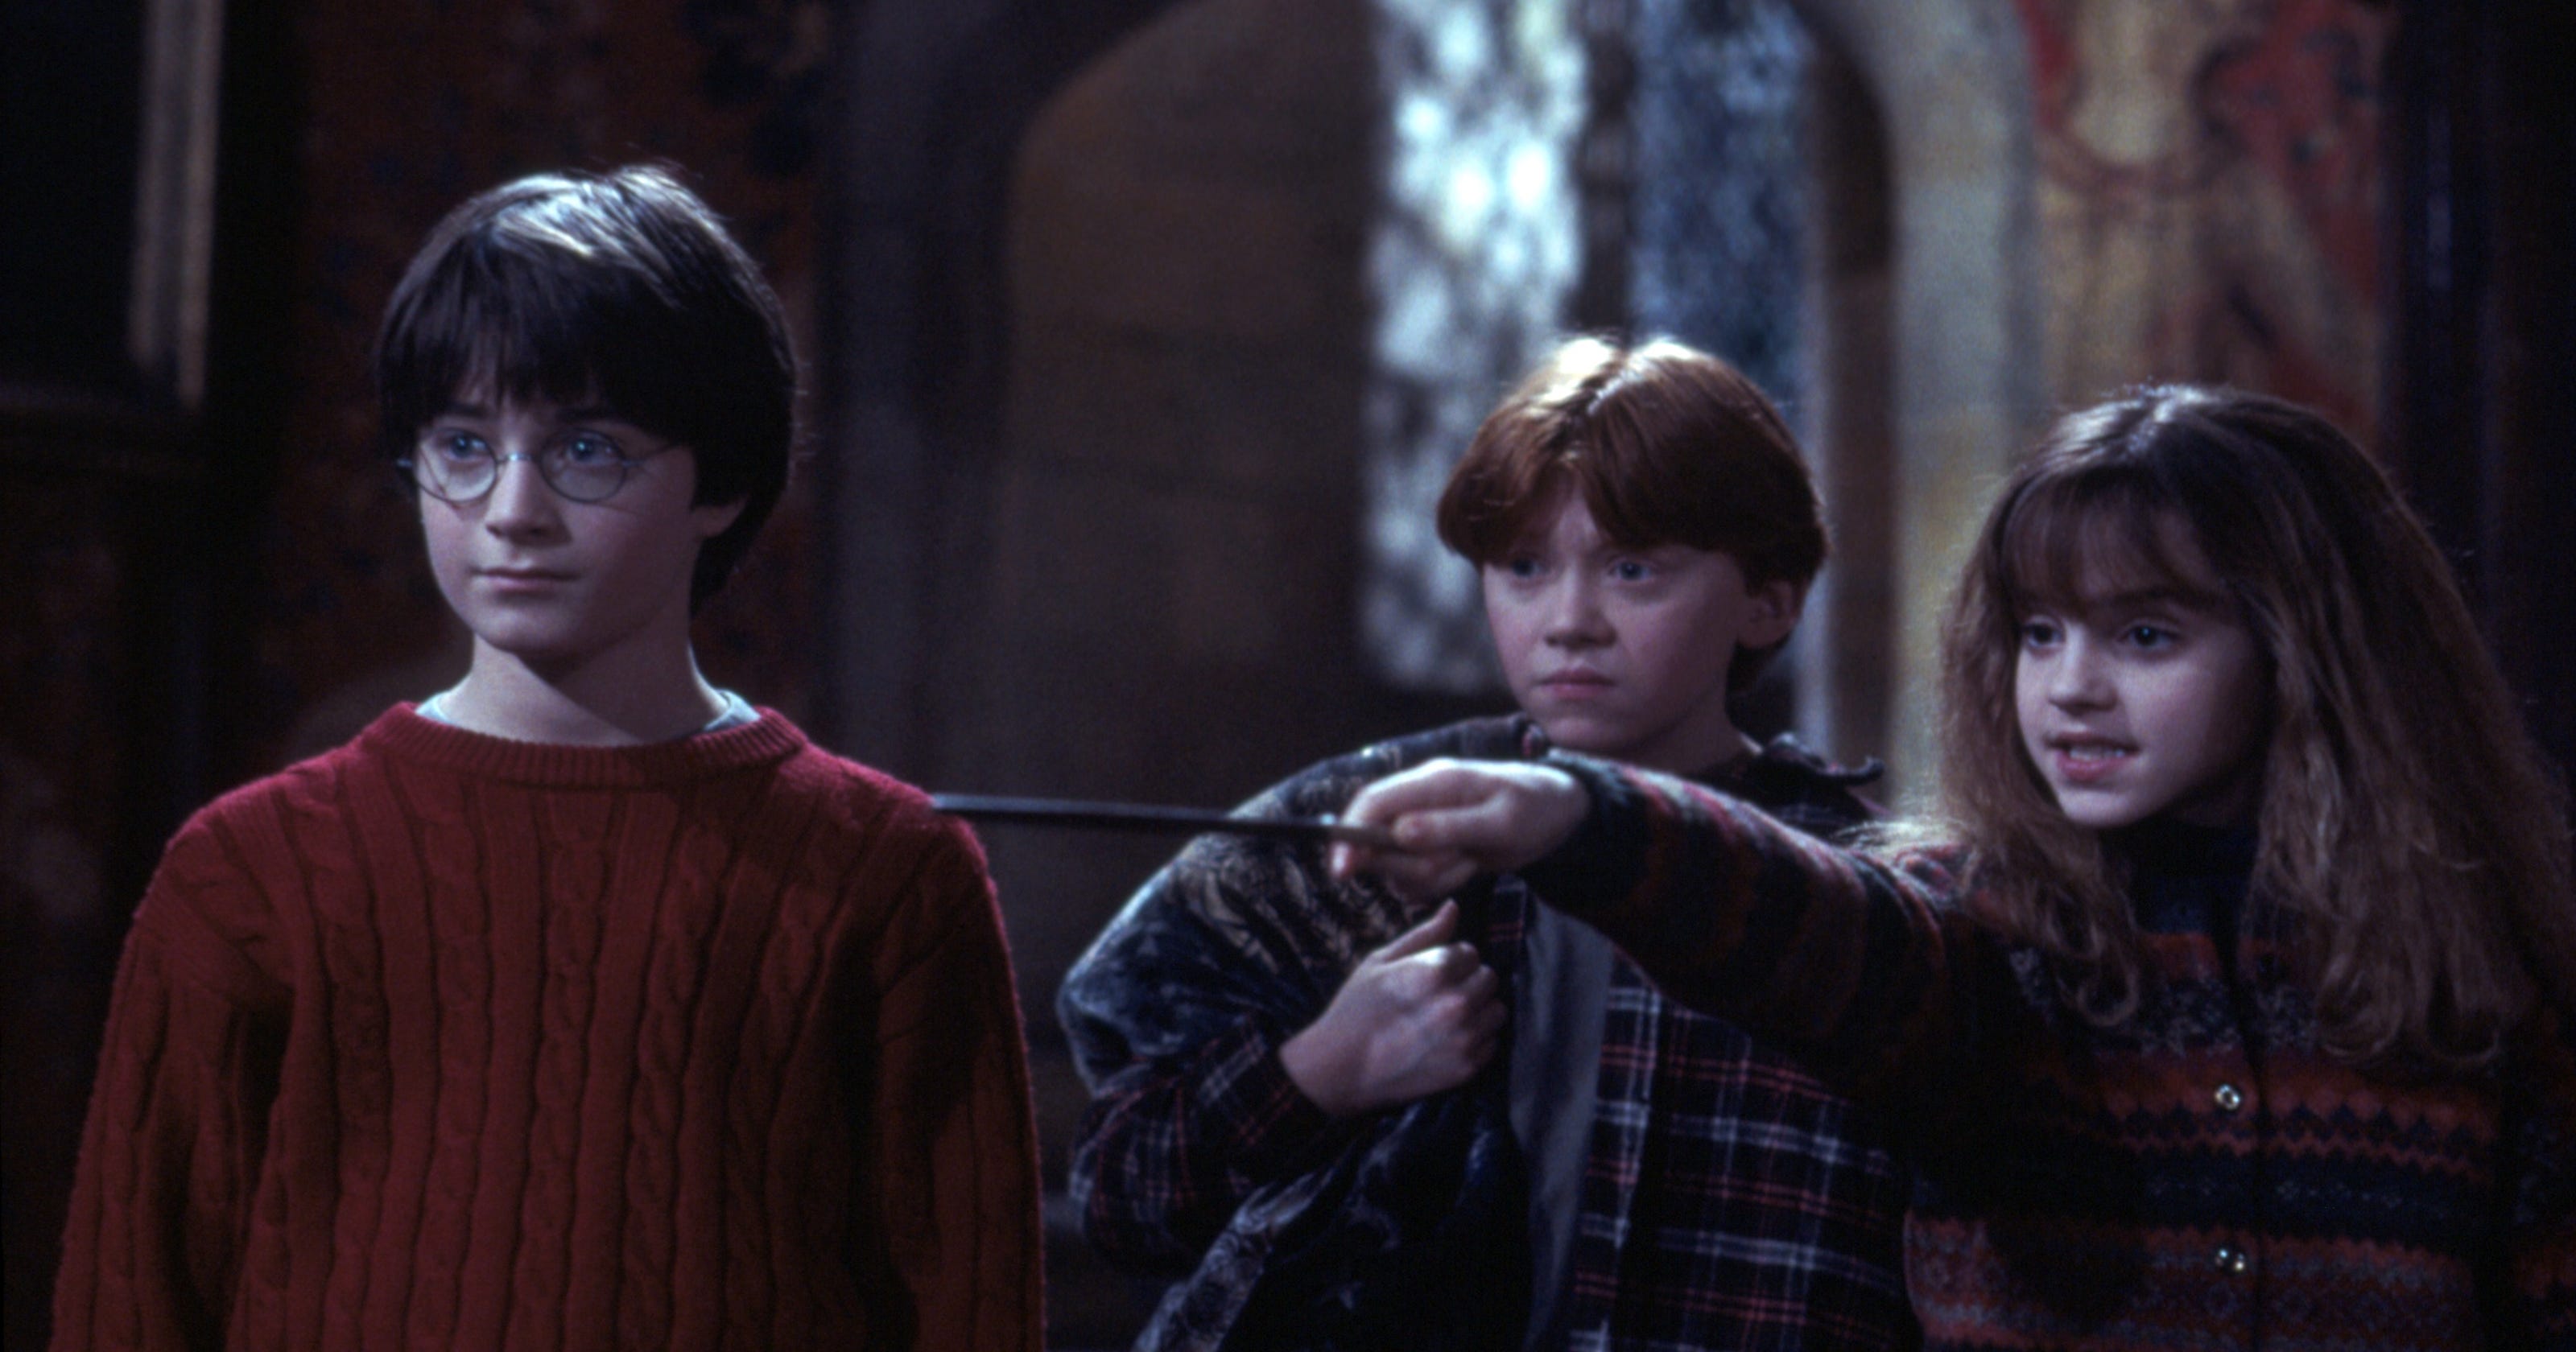 Watch Harry Potter movie 'Sorcerer's Stone' with live music from Fort - Harry Potter And The Sorcerer's Stone